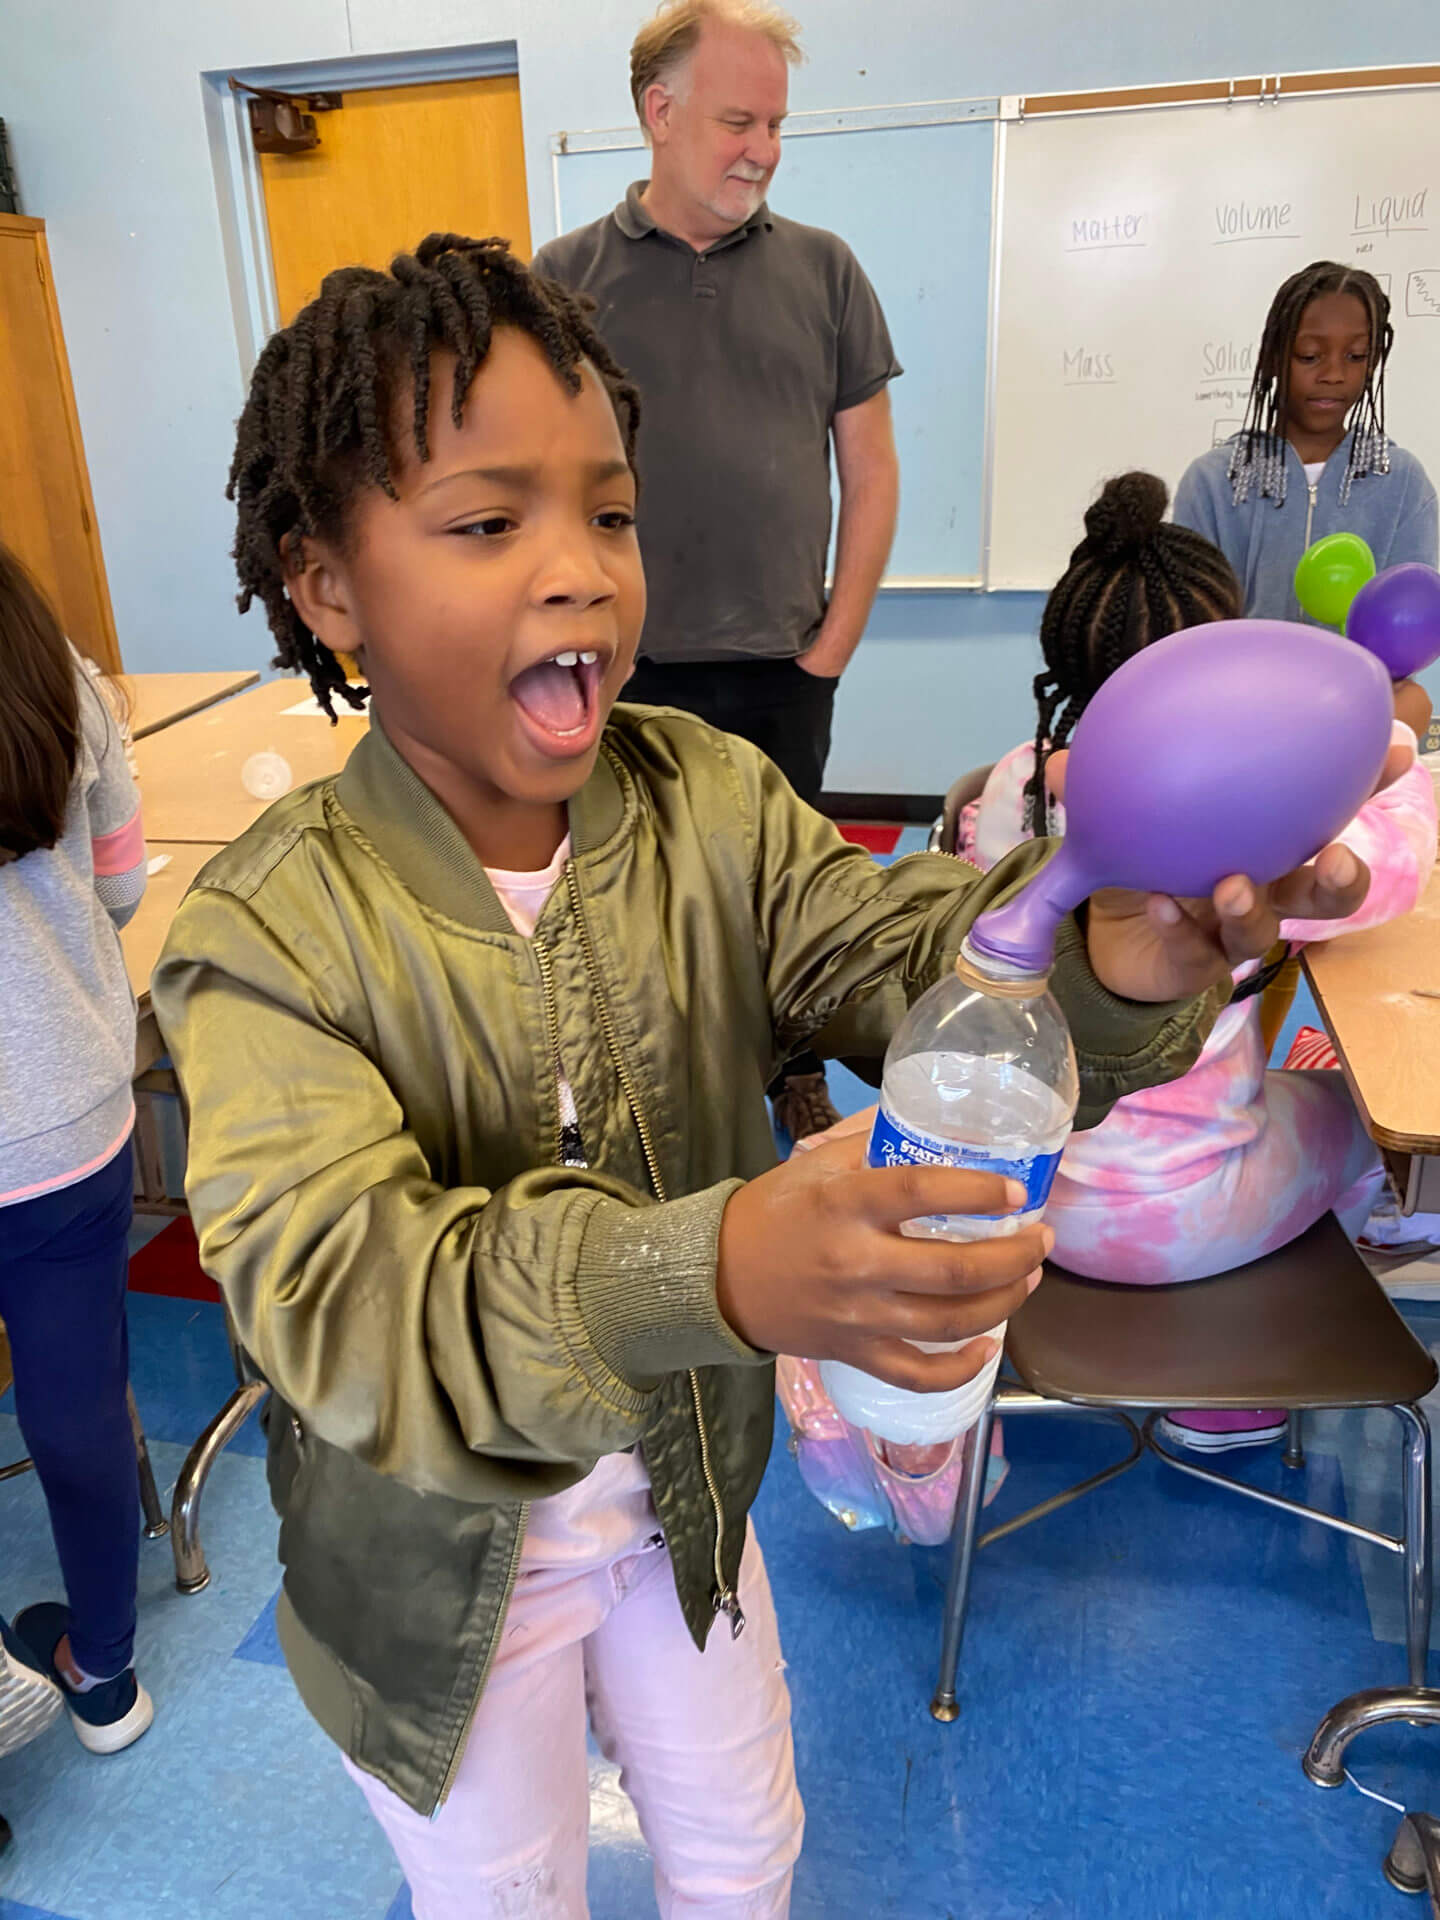 Student looking excited as he is holding a water bottle that a balloon is attached to. 